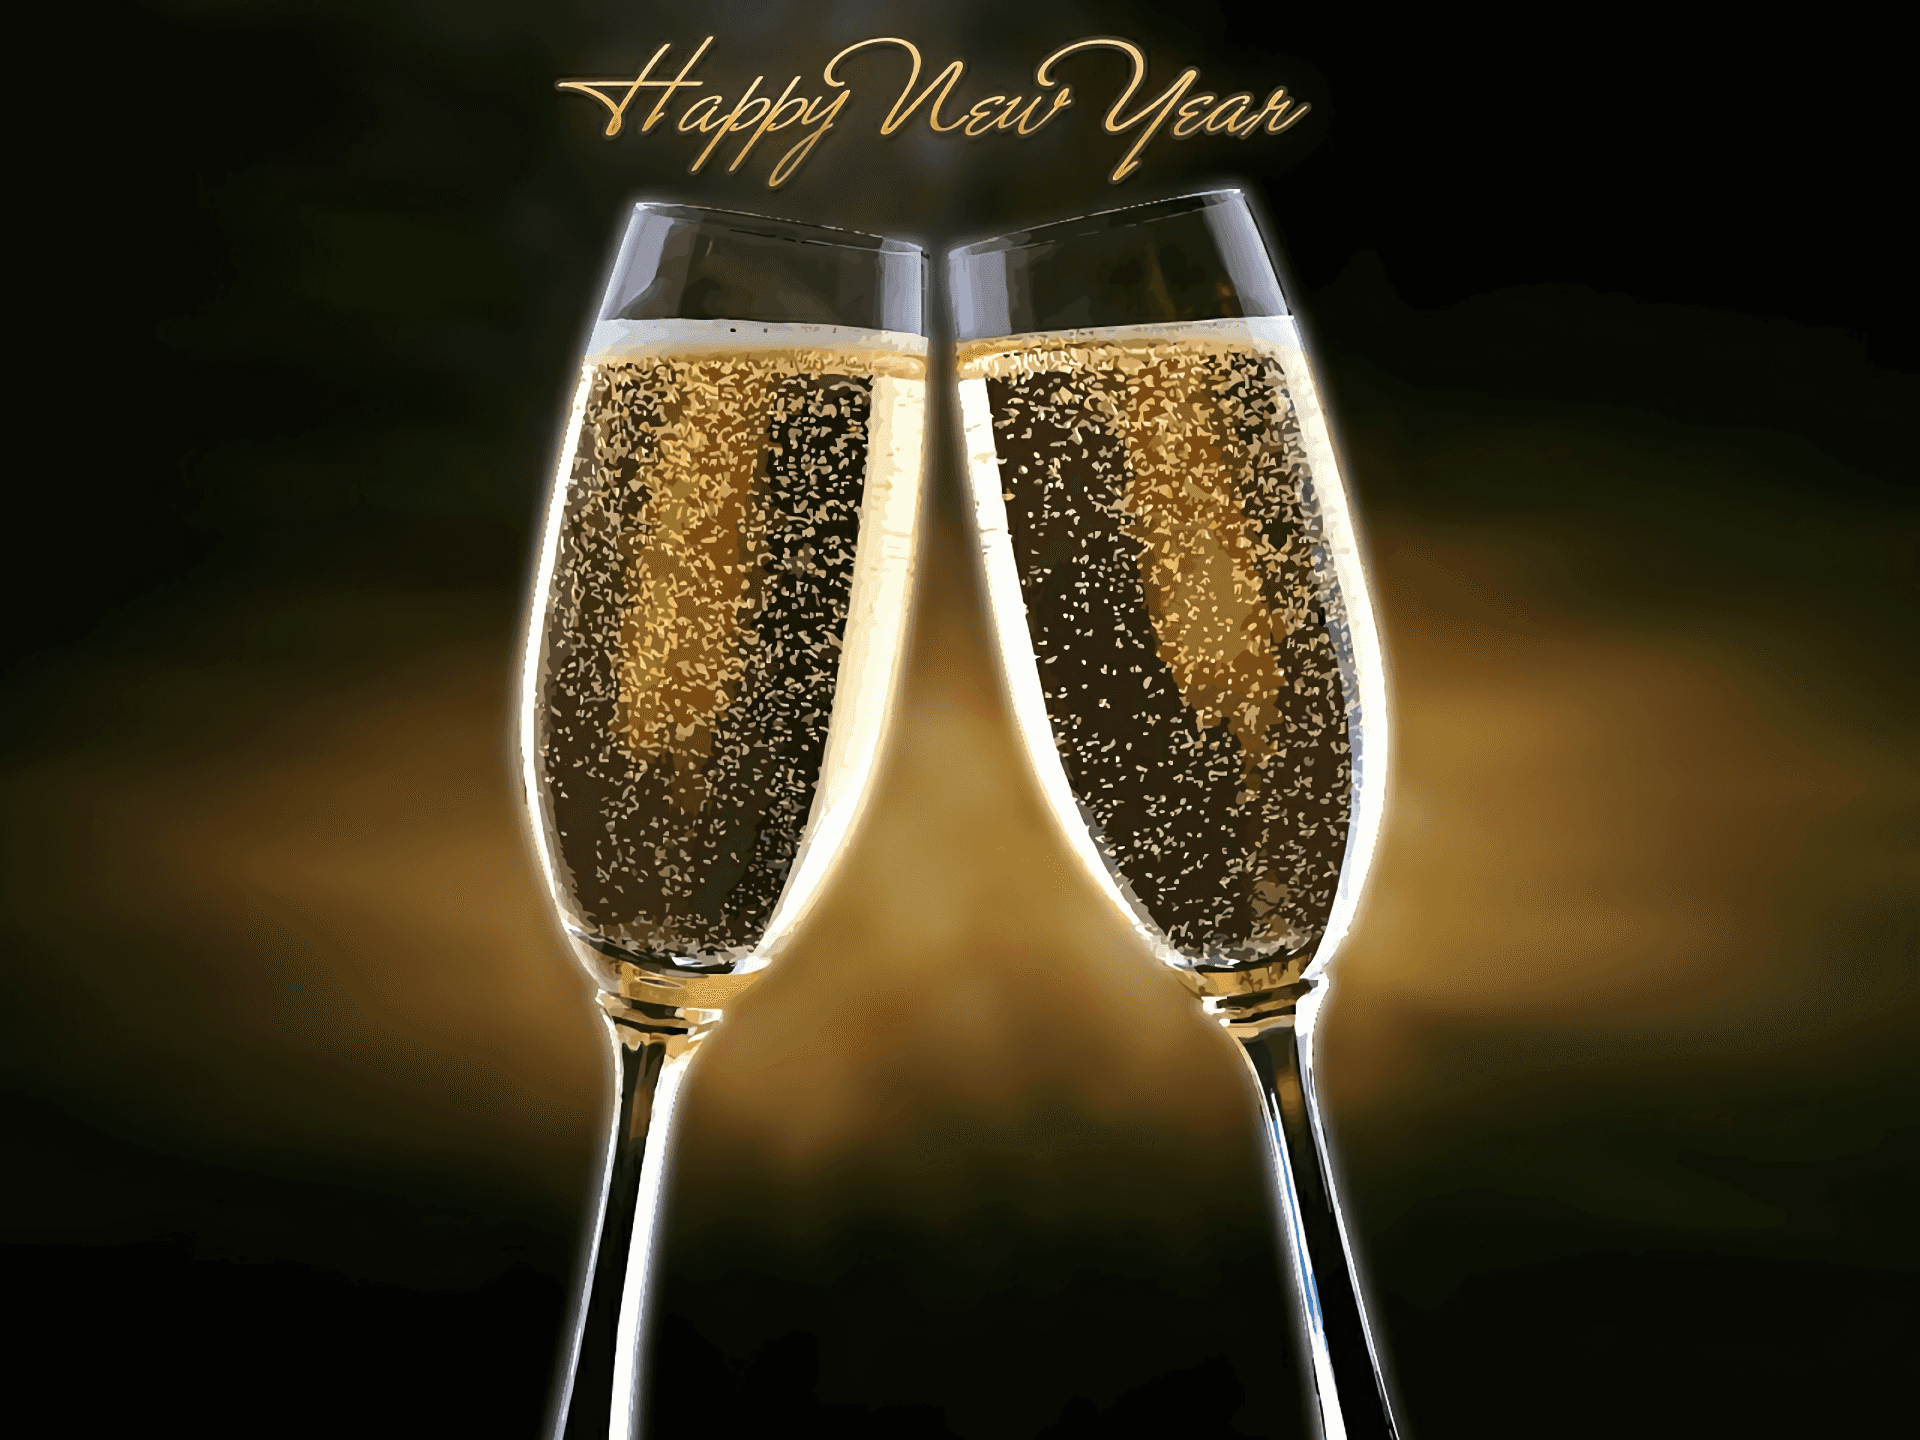 Happy New Year Champagne Glasses On A Black Background